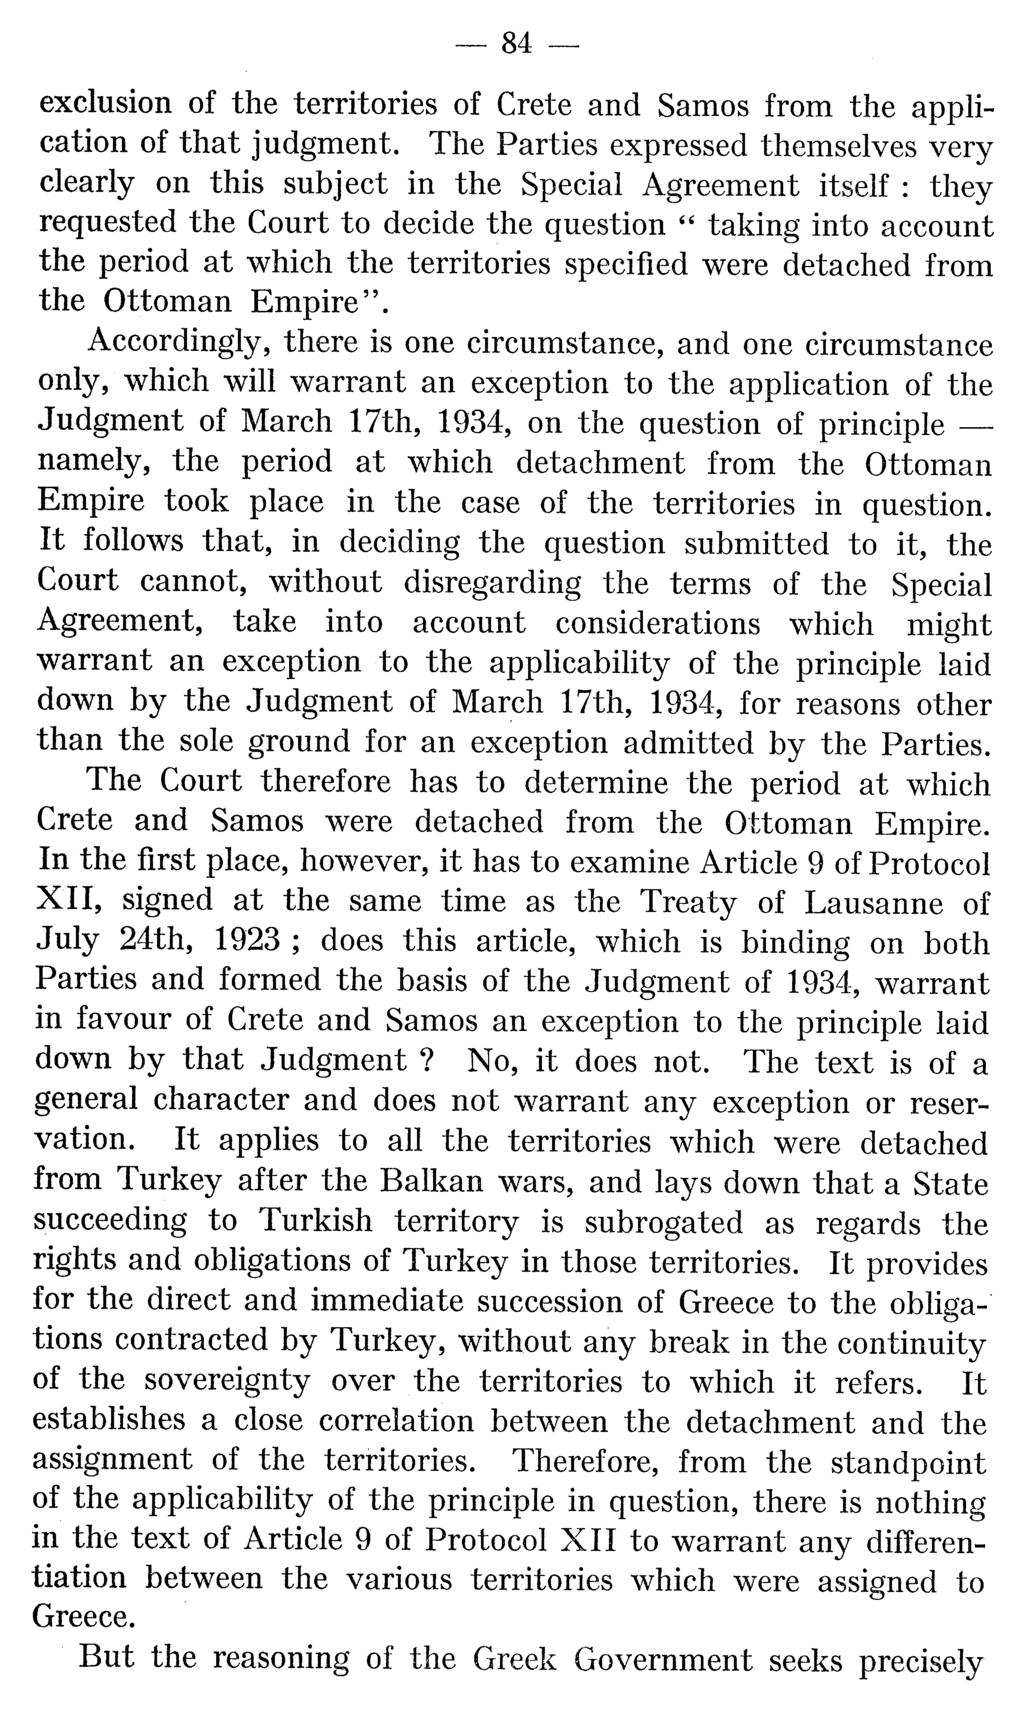 84 exclusion of the territories of Crete and Samos from the application of that judgment.